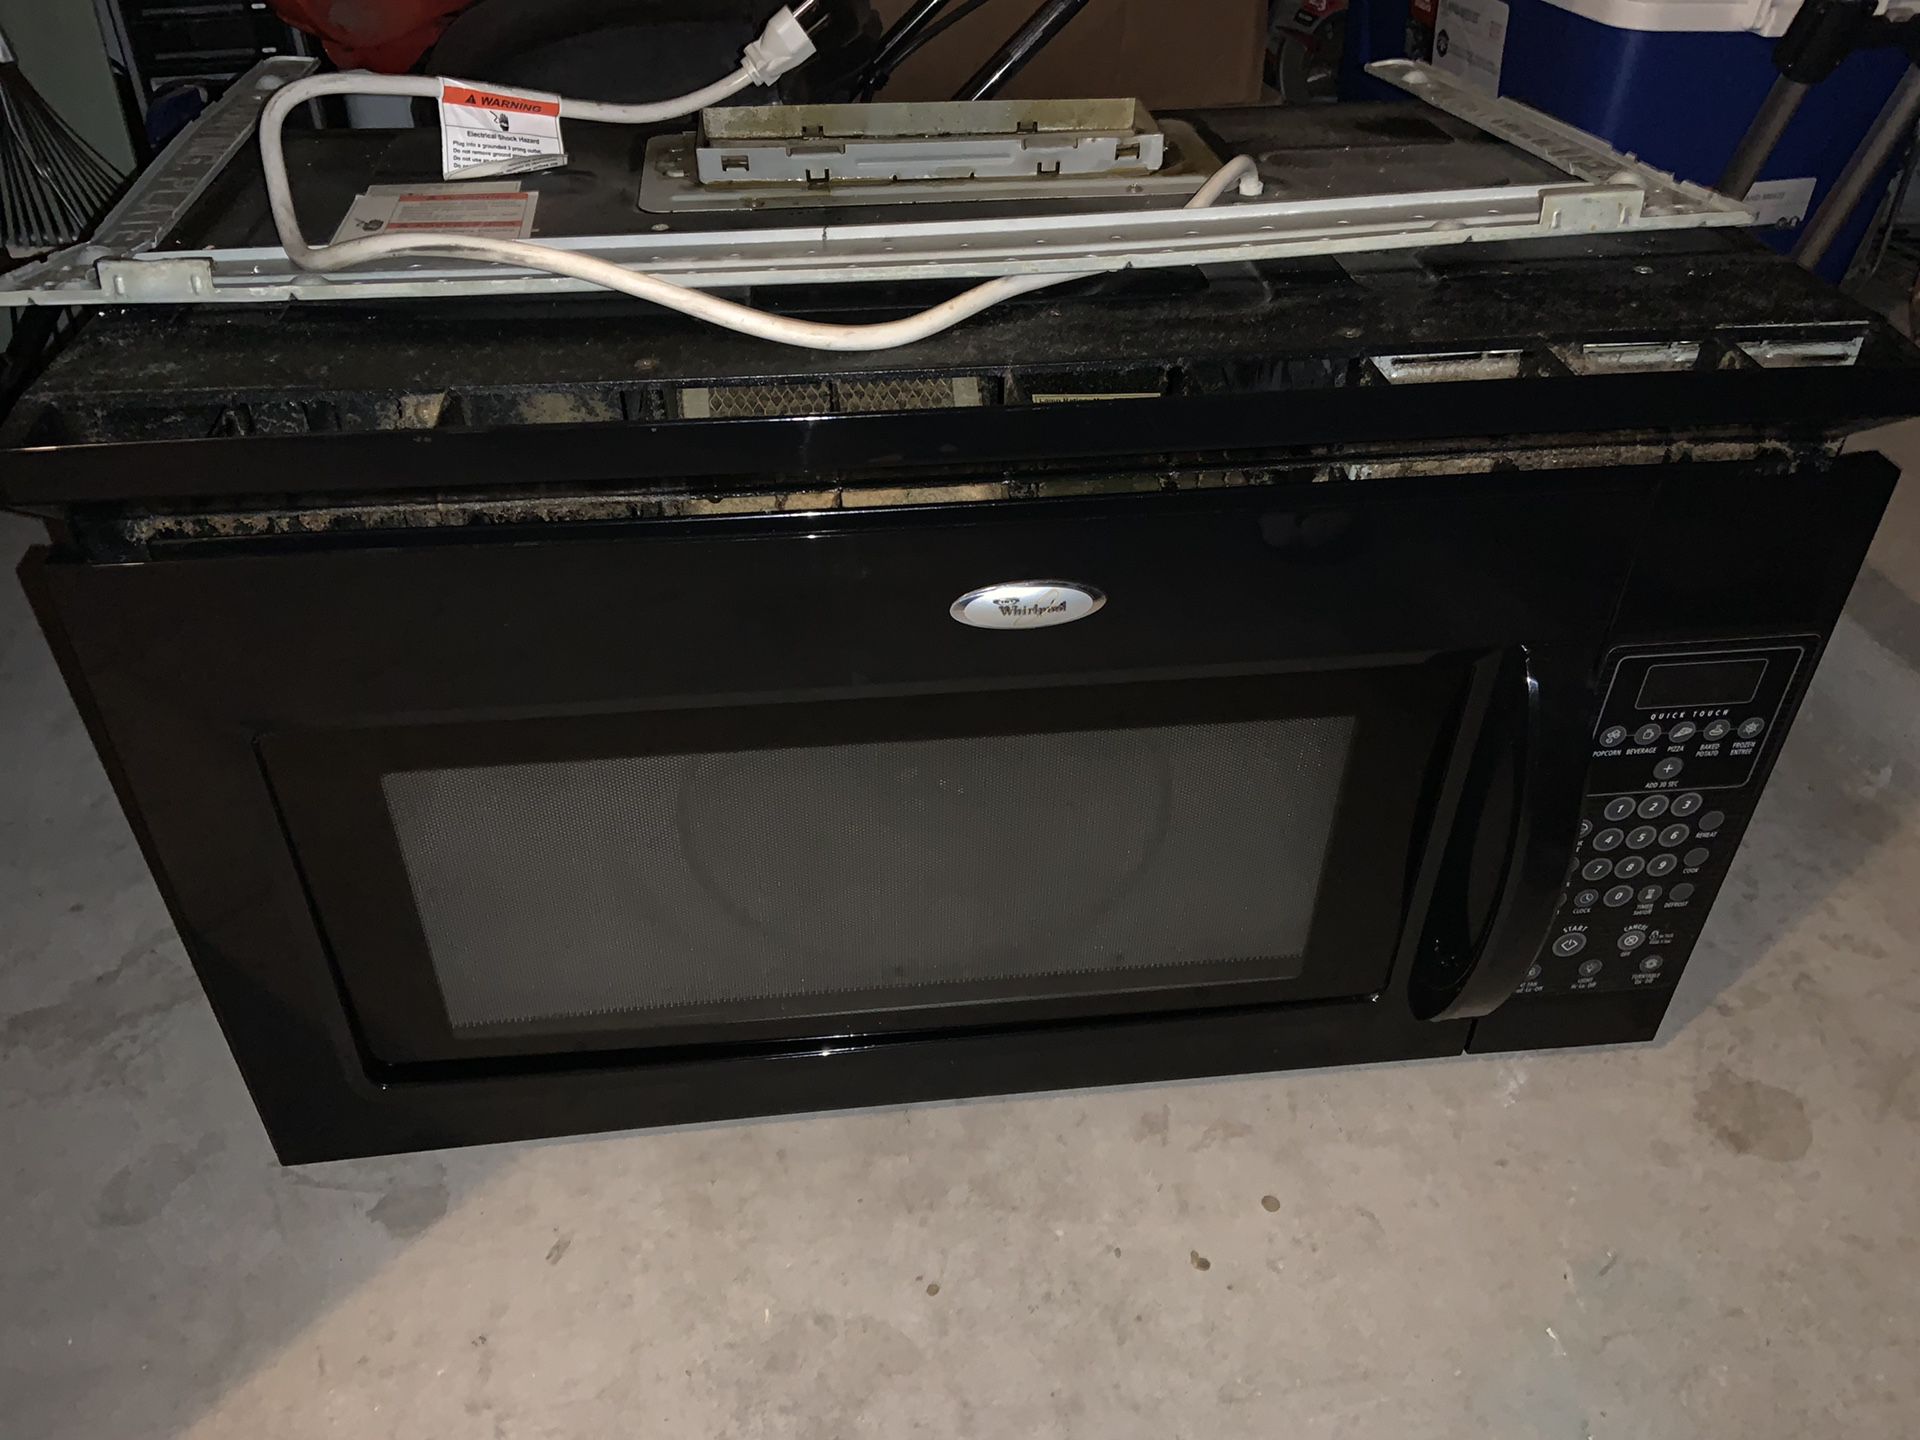 Whirlpool appliances( normal wear) selling the three together